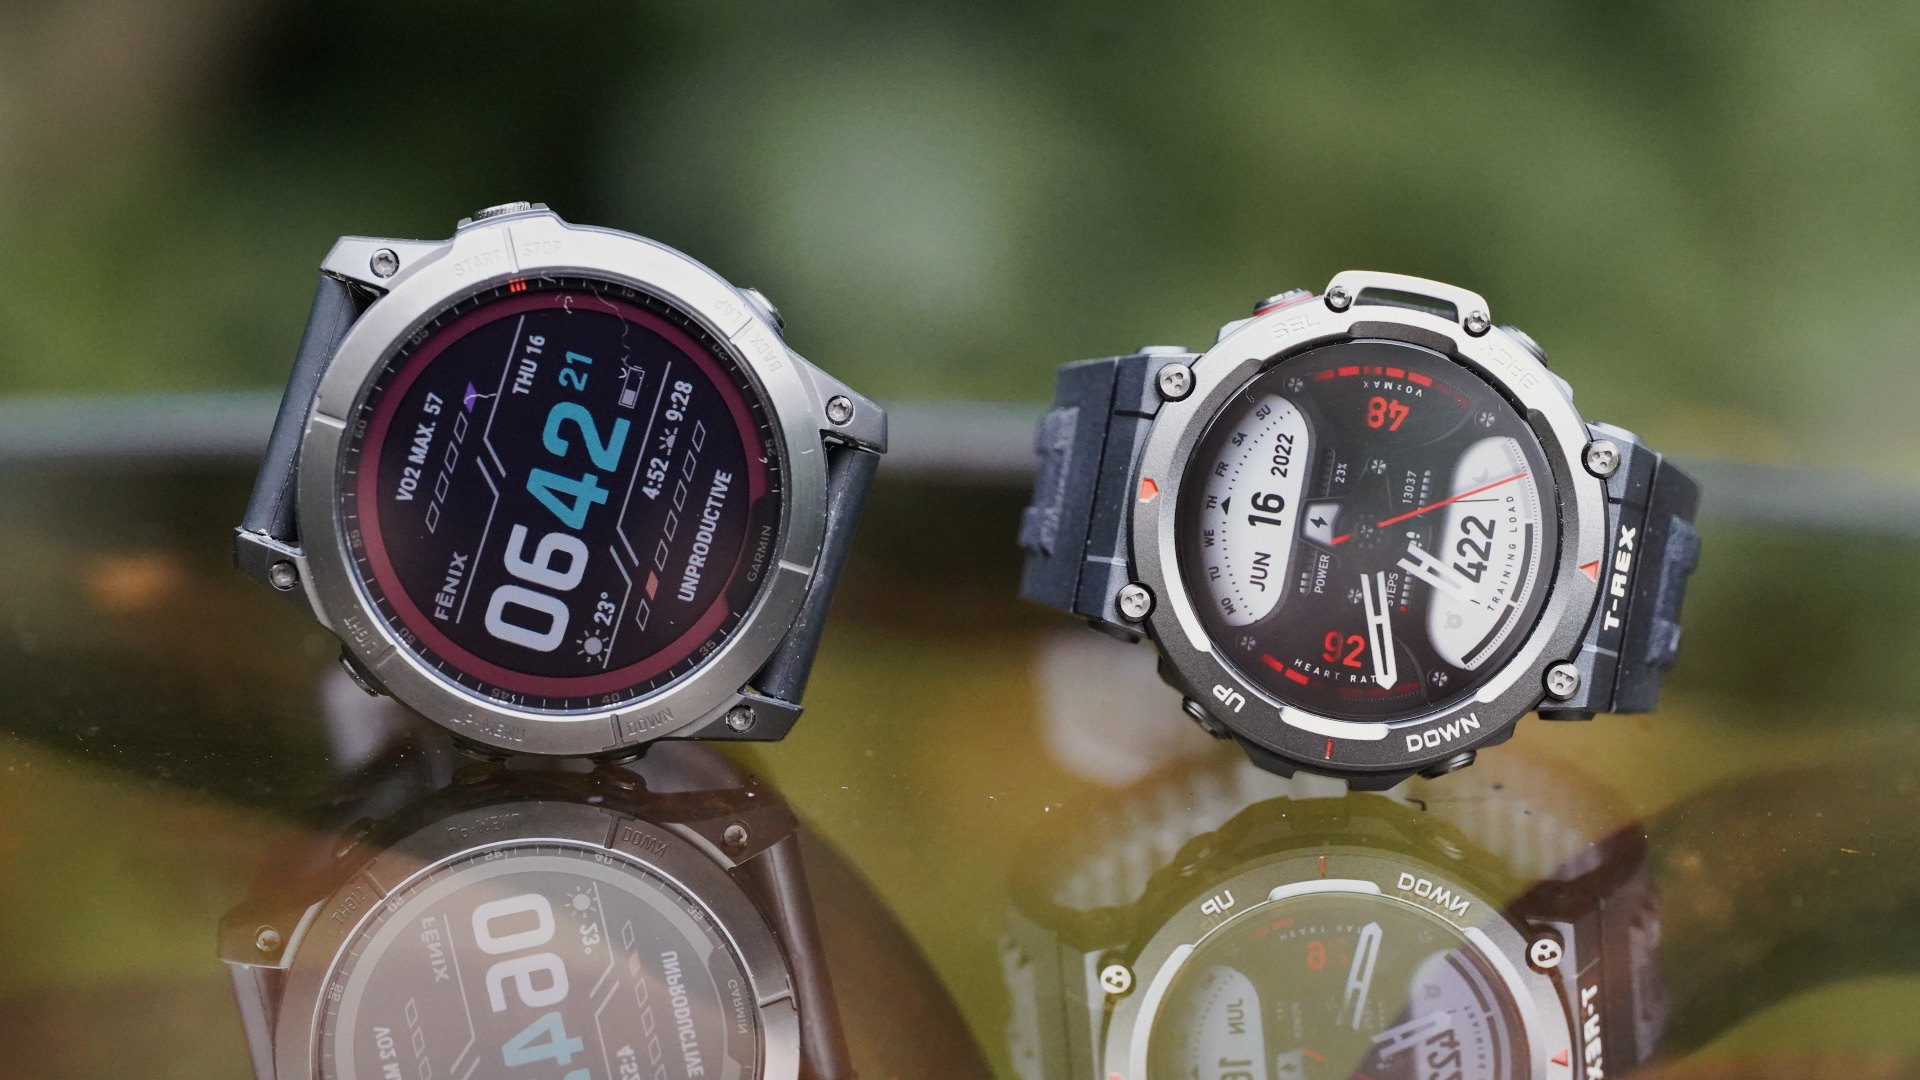 The lightweight Suunto 5 Peak offers now a lighter, longer lasting smart  watch that is less than $500! – Travel & Lifestyle